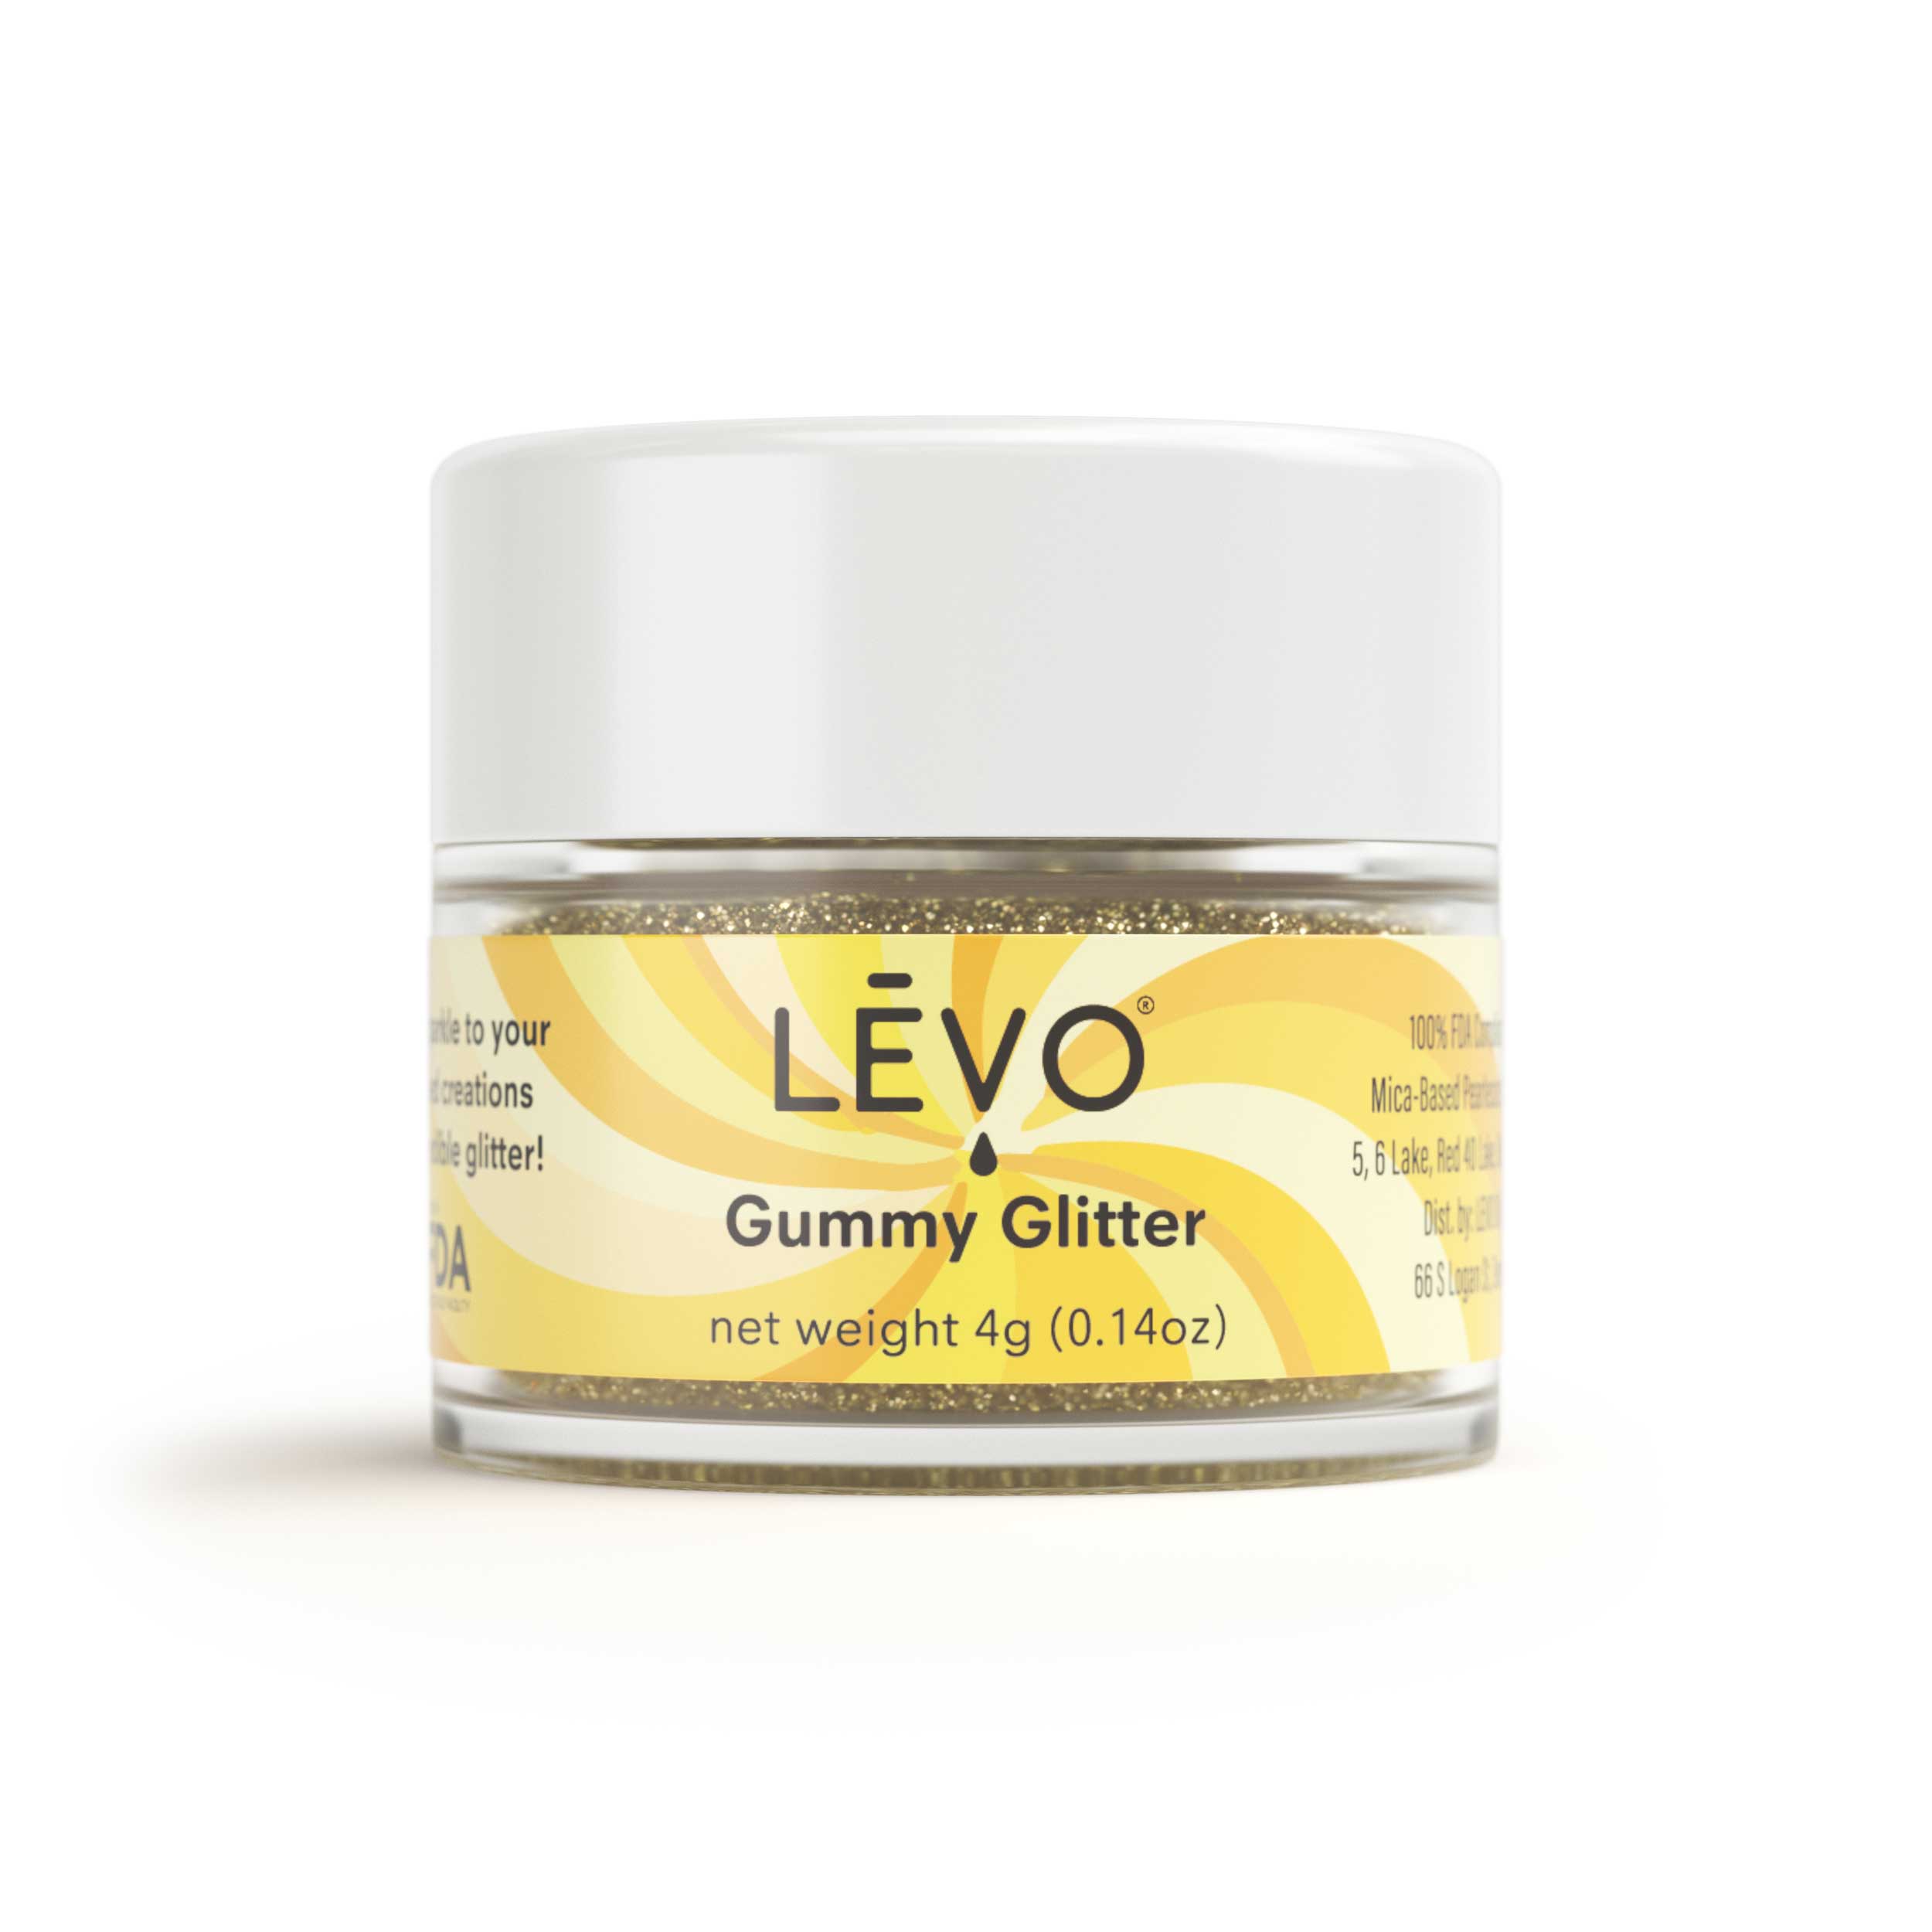 Dust your LEVO made creations with edible gold glitter. Use a brush to apply gold glitter to your foods to make them shine. Take your gummies and candies to the next level with the shimmering magic of the Gummy Glitter + Infusion Shimmer Kit.